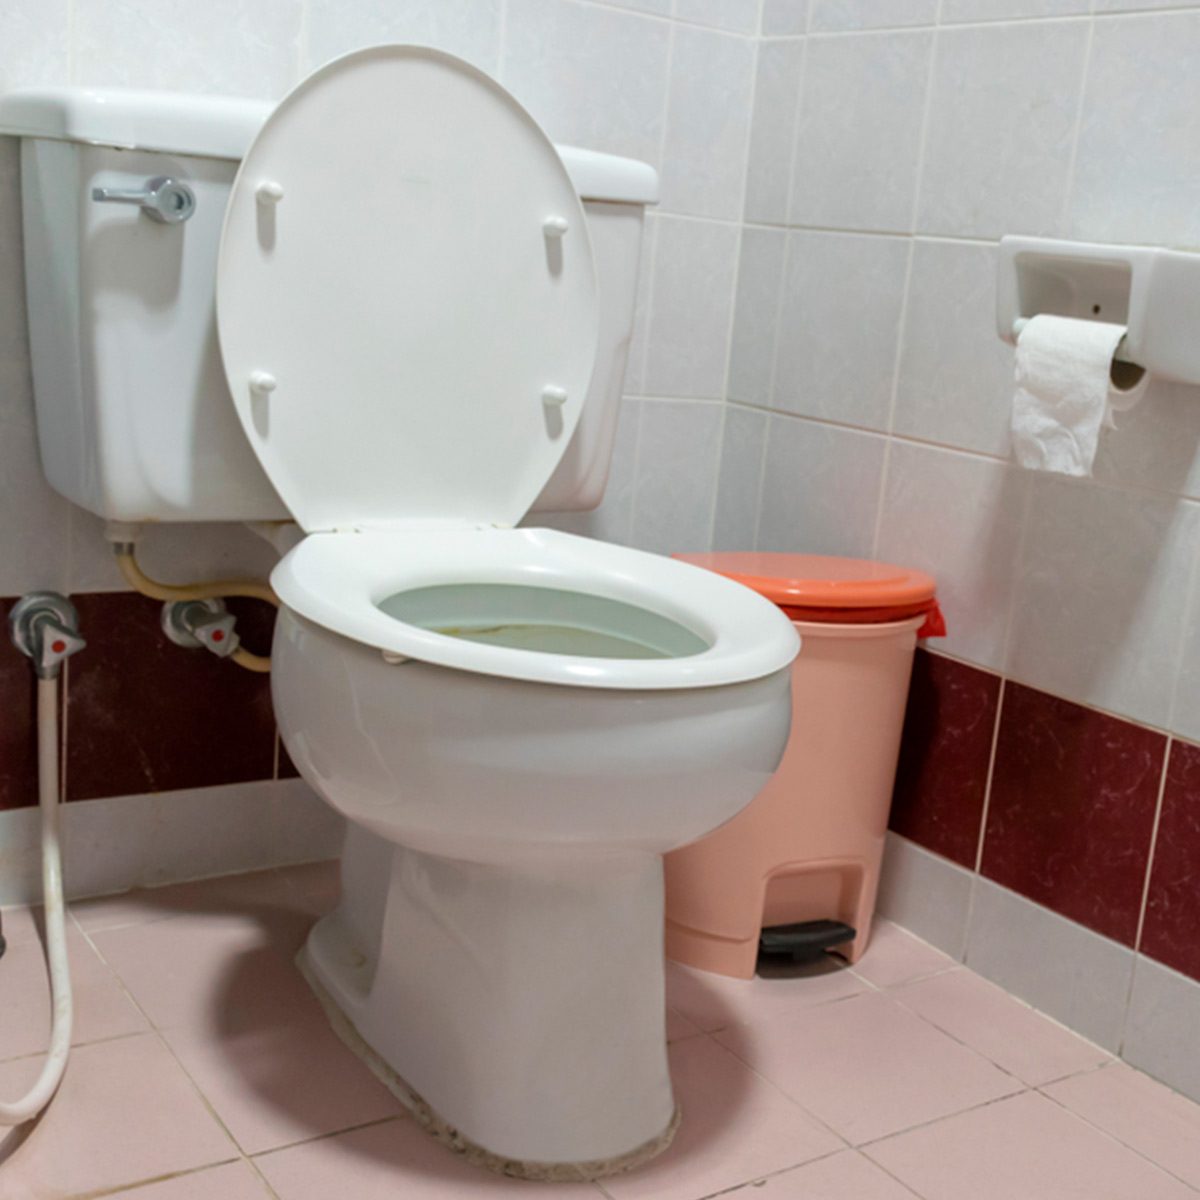 Always Close the Toilet Lid When You Flush, Here’s Why